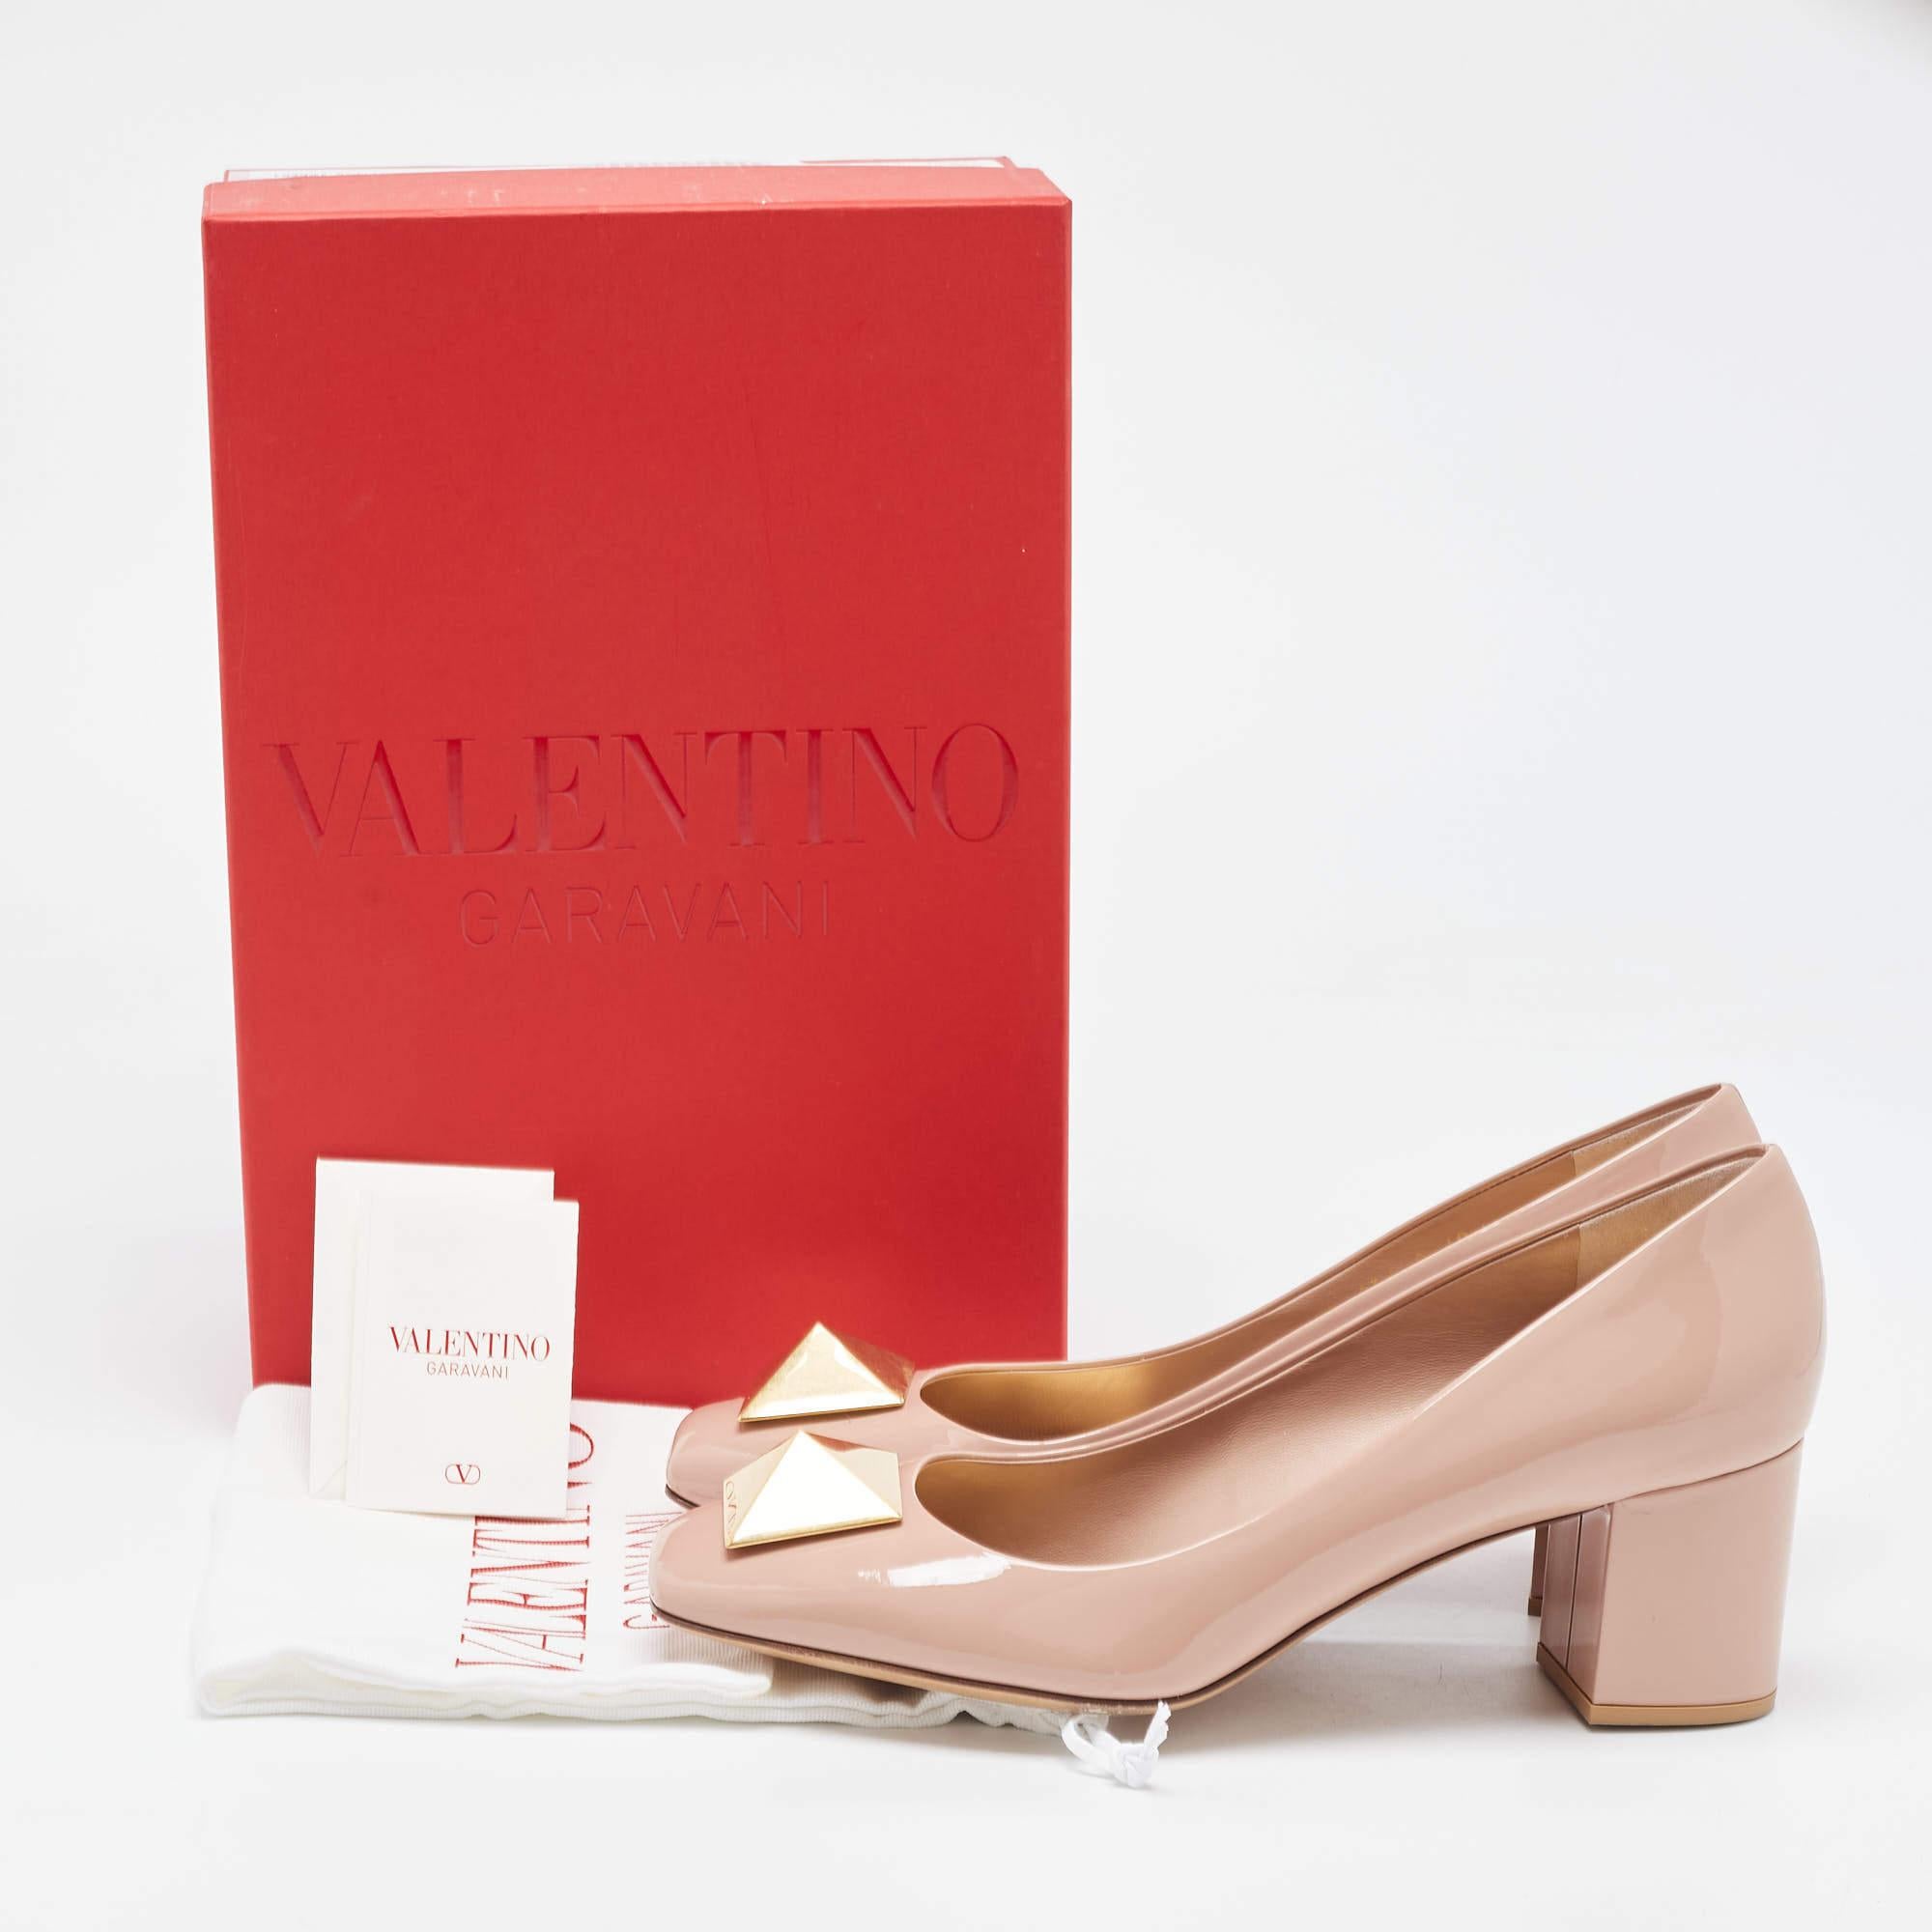 Valentino Dusty Pink Patent Leather One Stud Pumps Size 40 5